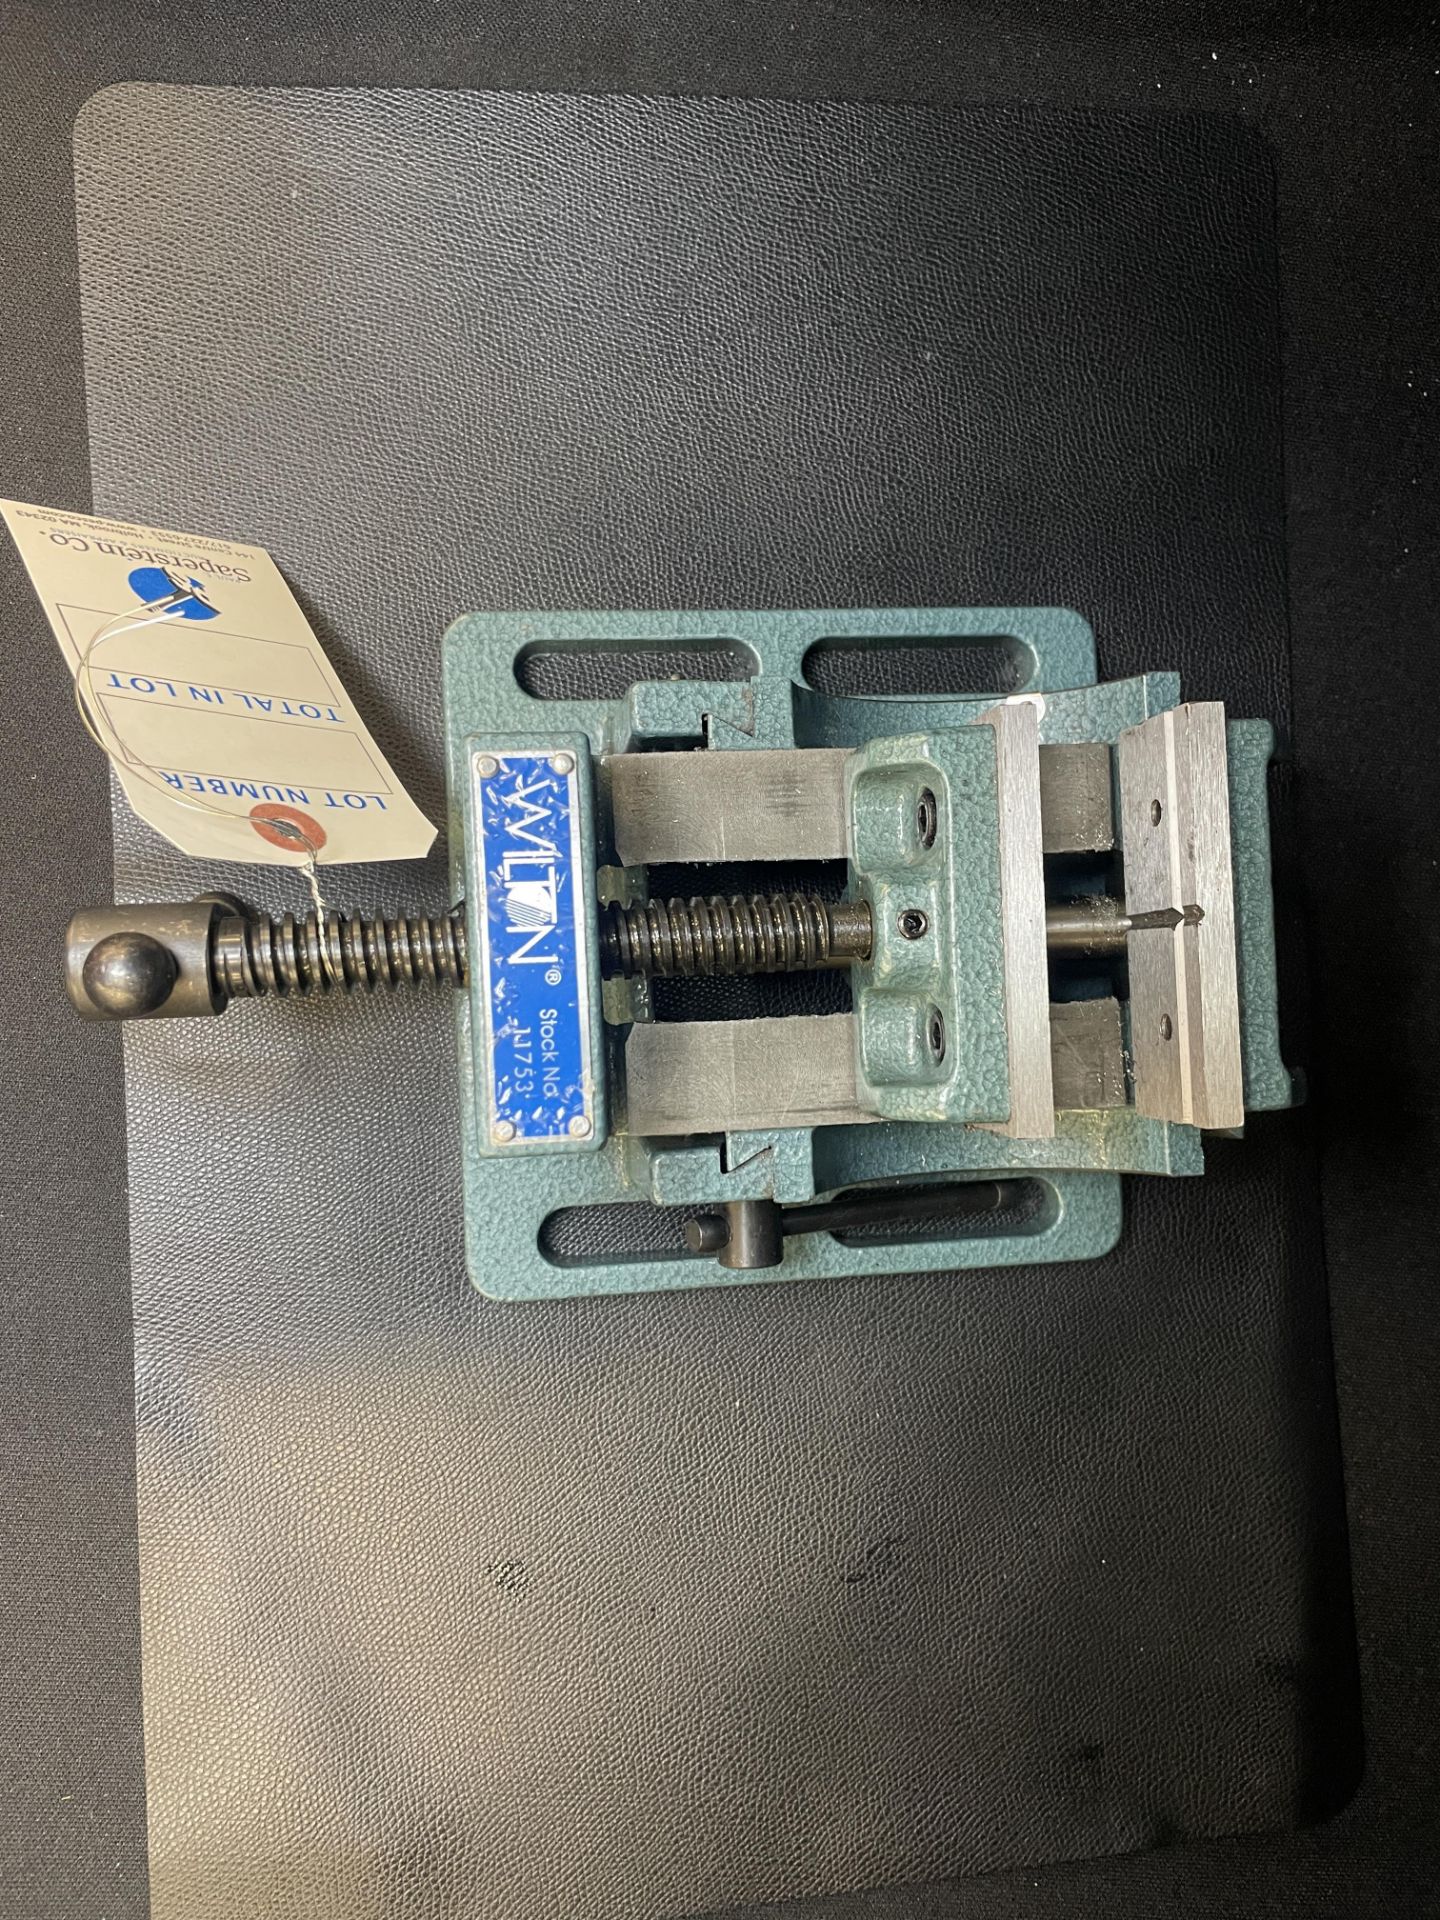 Wilton Slide Bed Vice w/3 1/4" Jaws